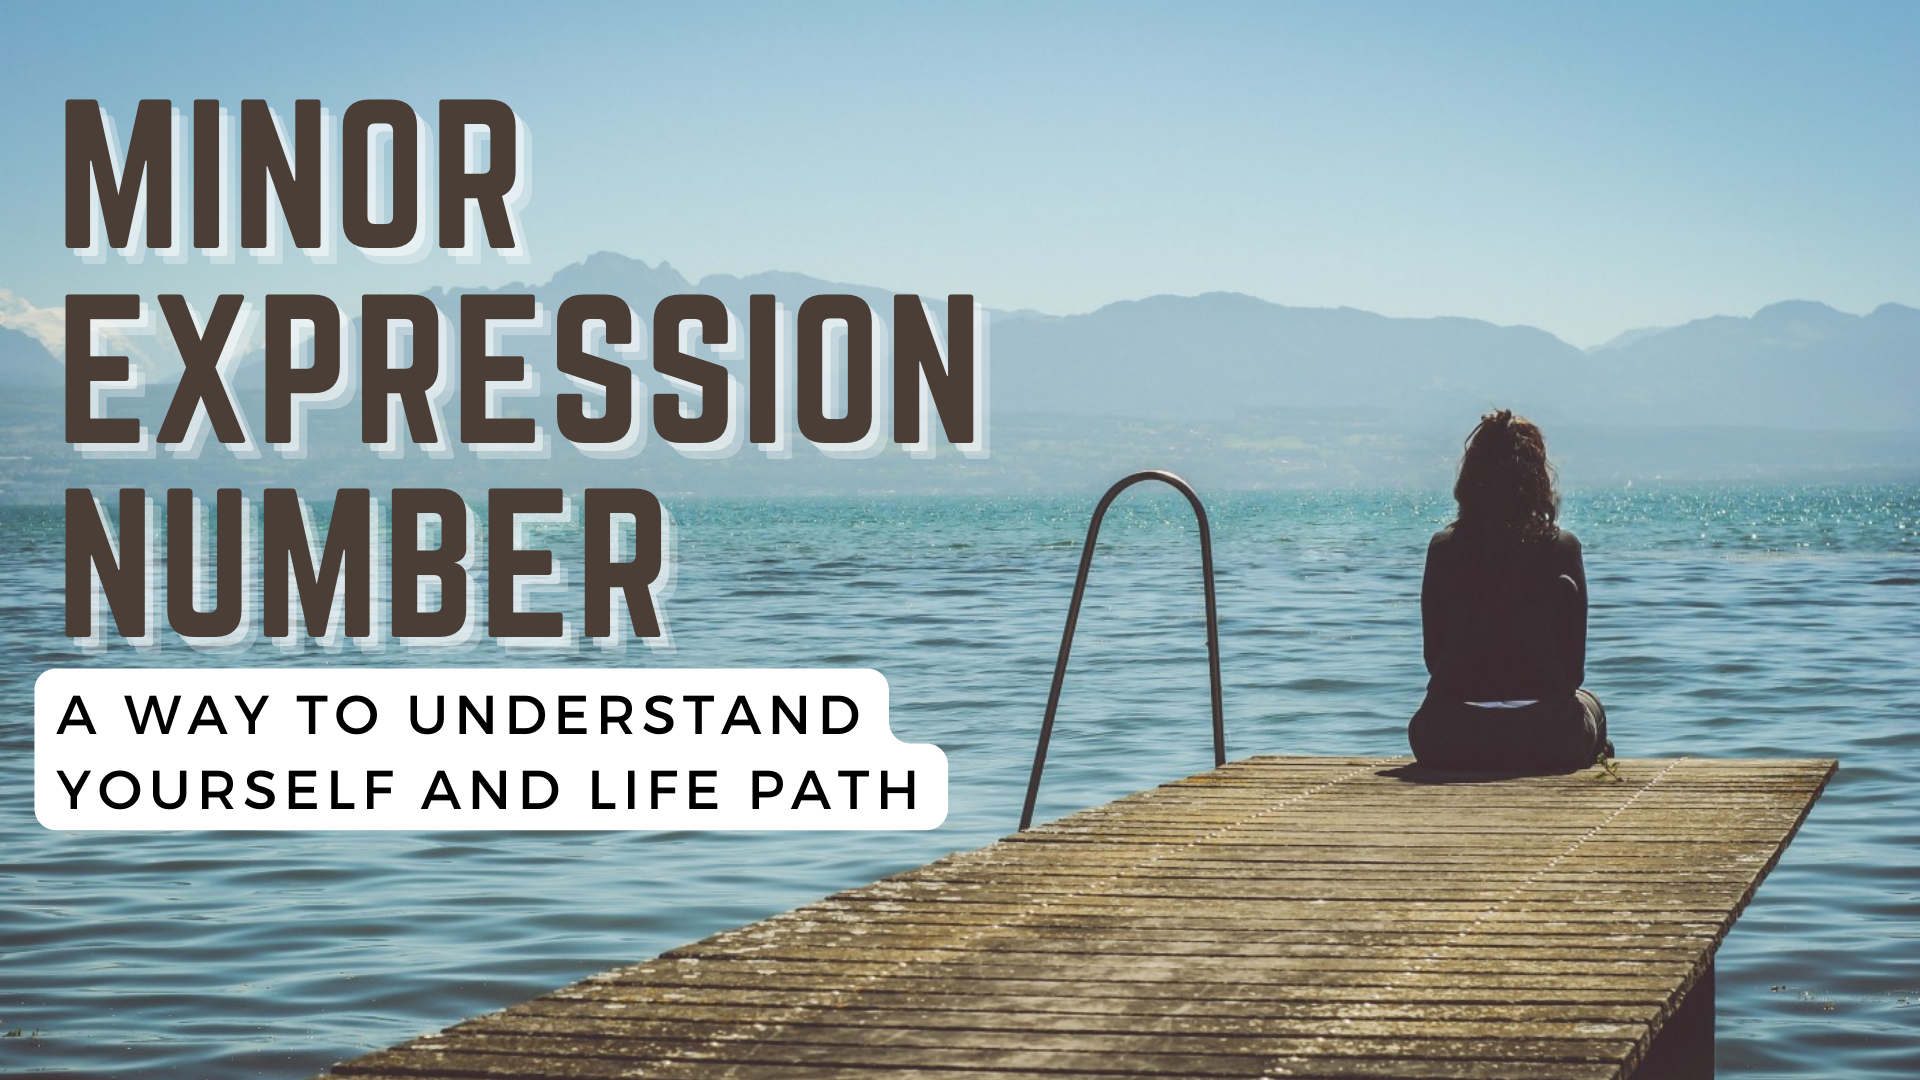 Minor Expression Number - A Way To Understand Yourself And Life Path